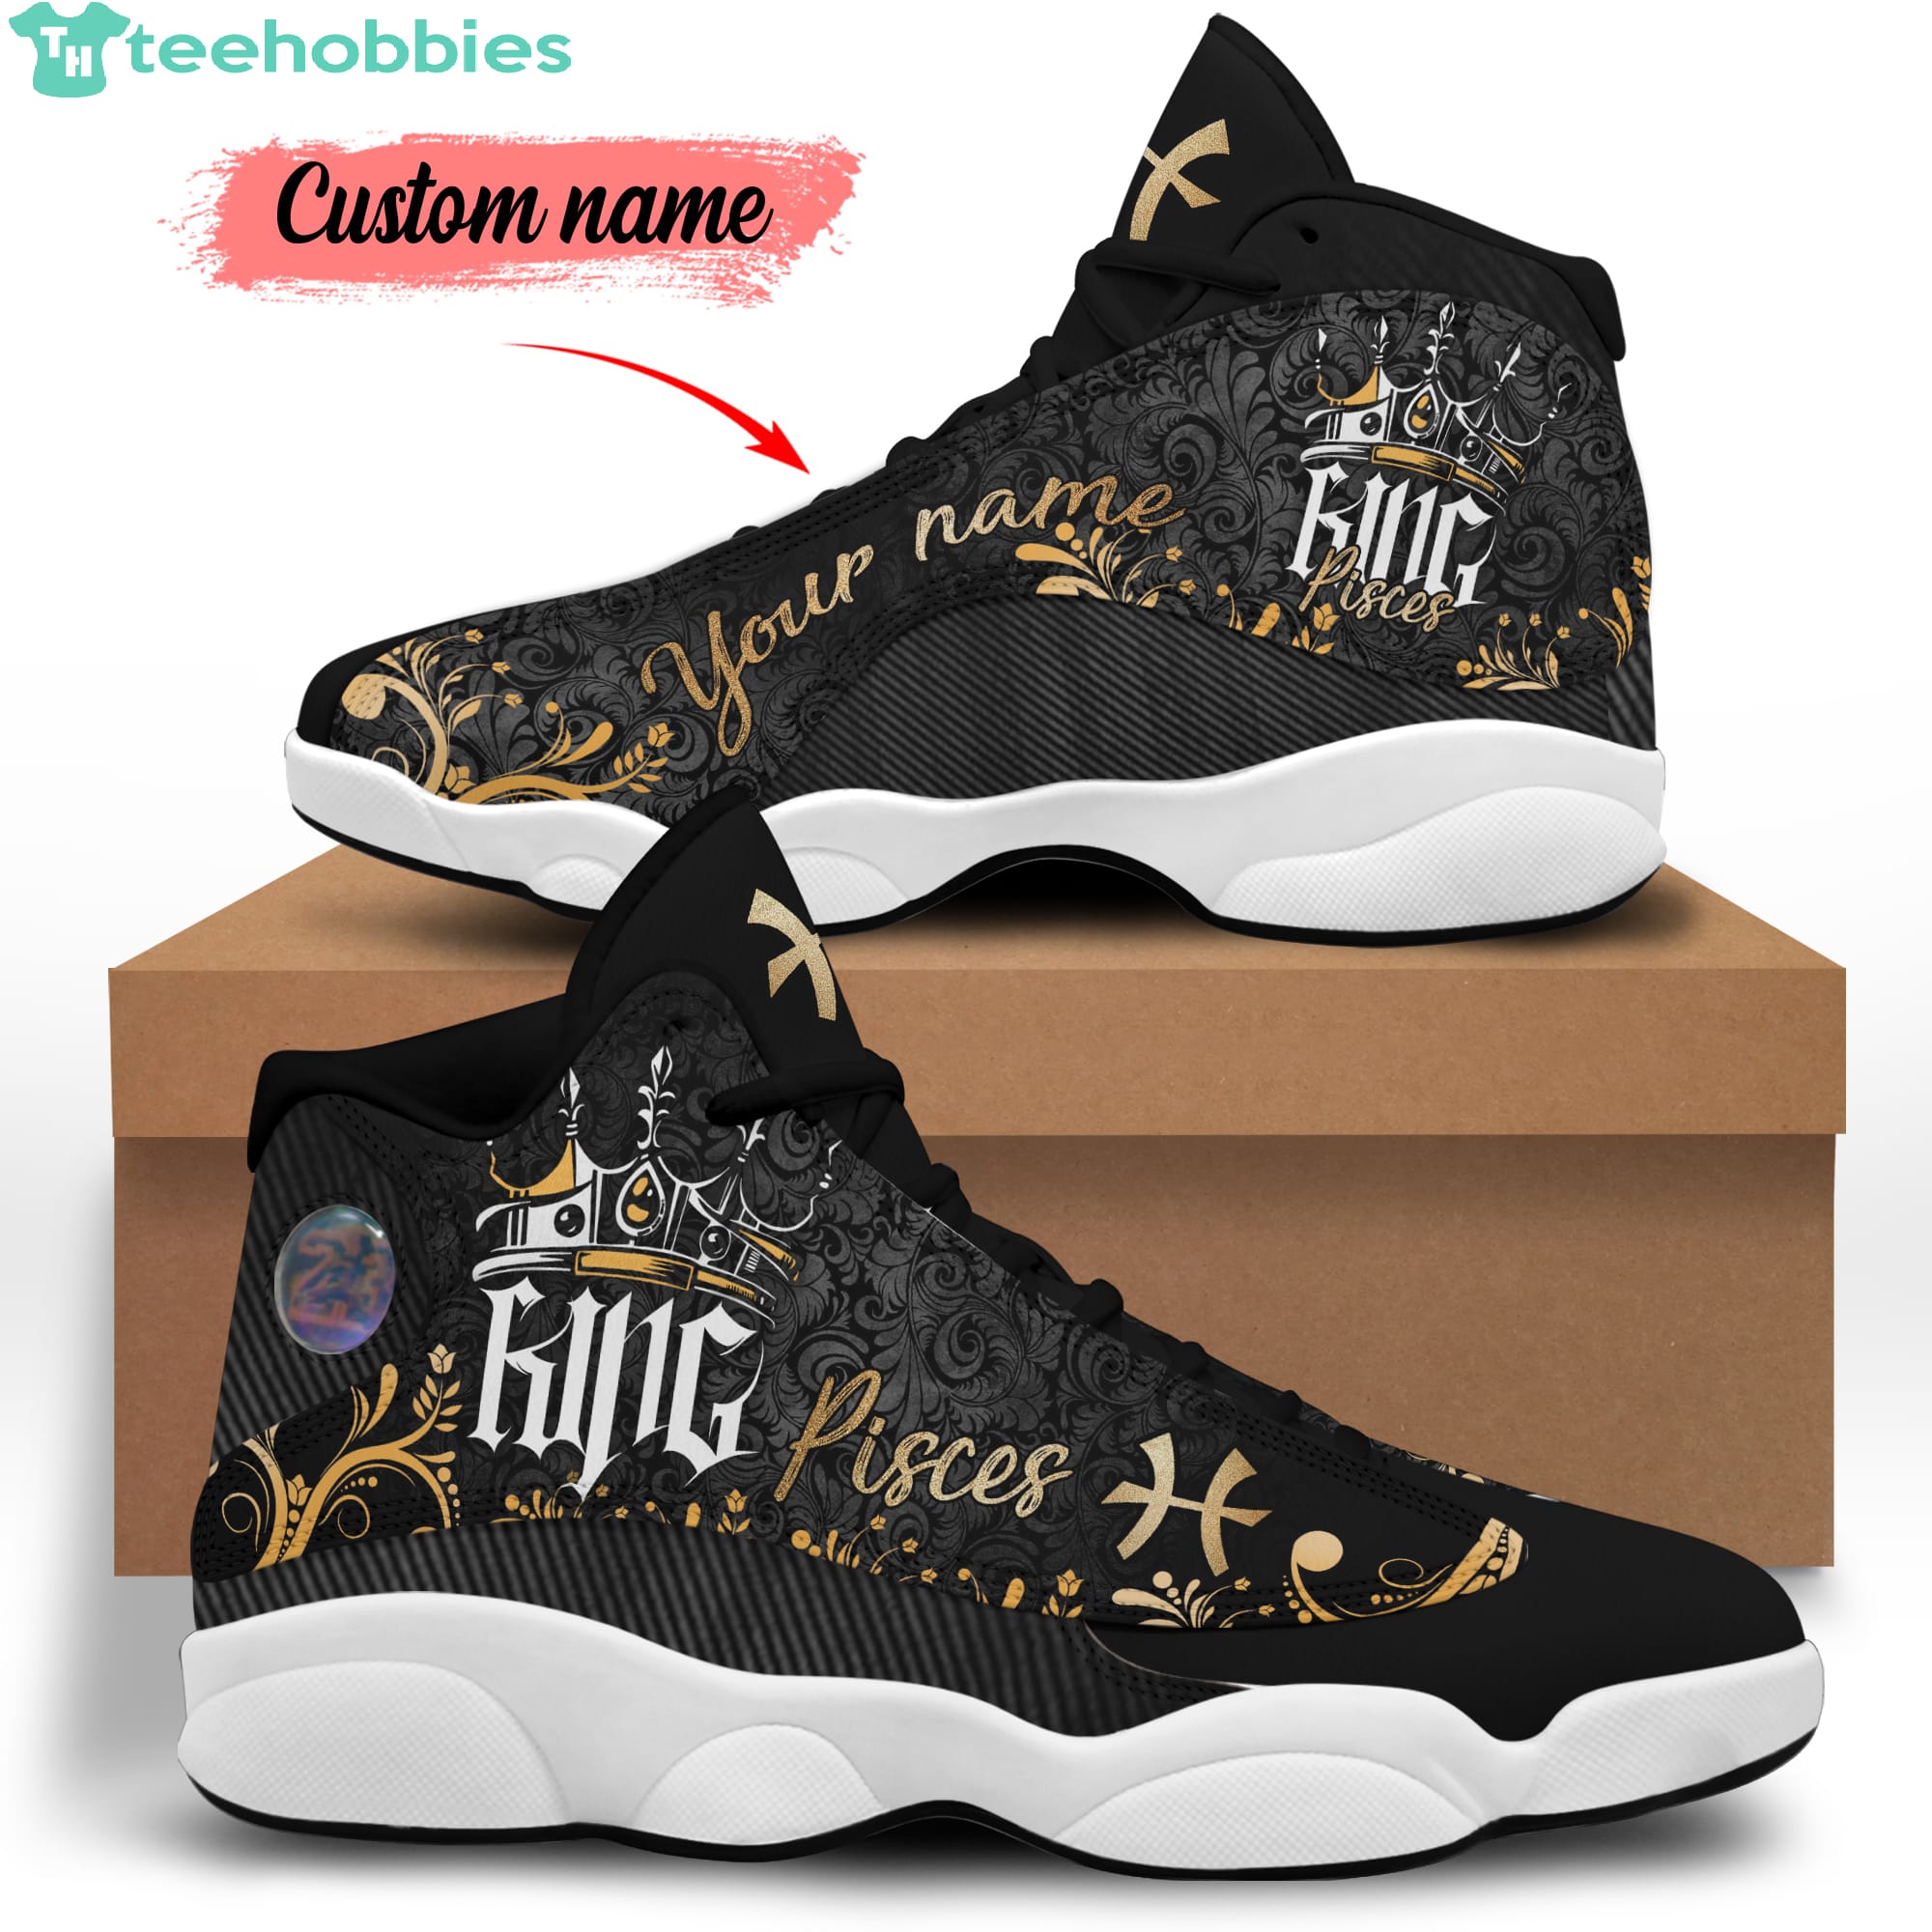 Pisces Birthday Gift King Personalized Name Air Jordan 13 Shoes